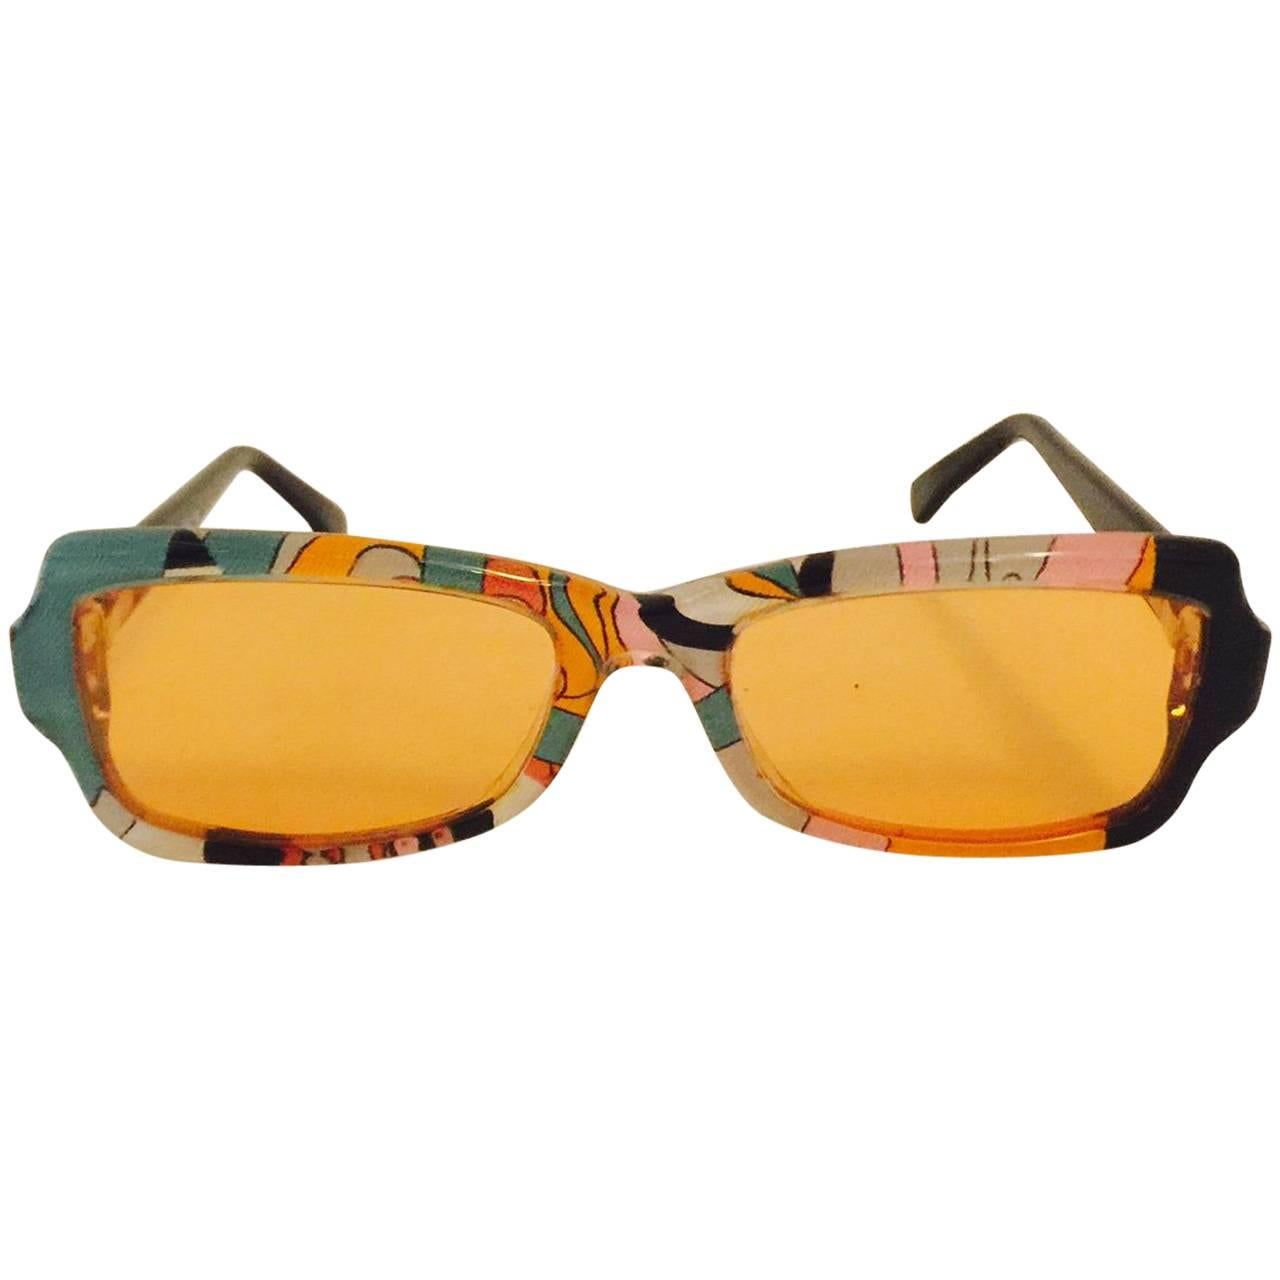 Vintage Pucci Iconic Print Sunglasses in Green, Pink and Orange